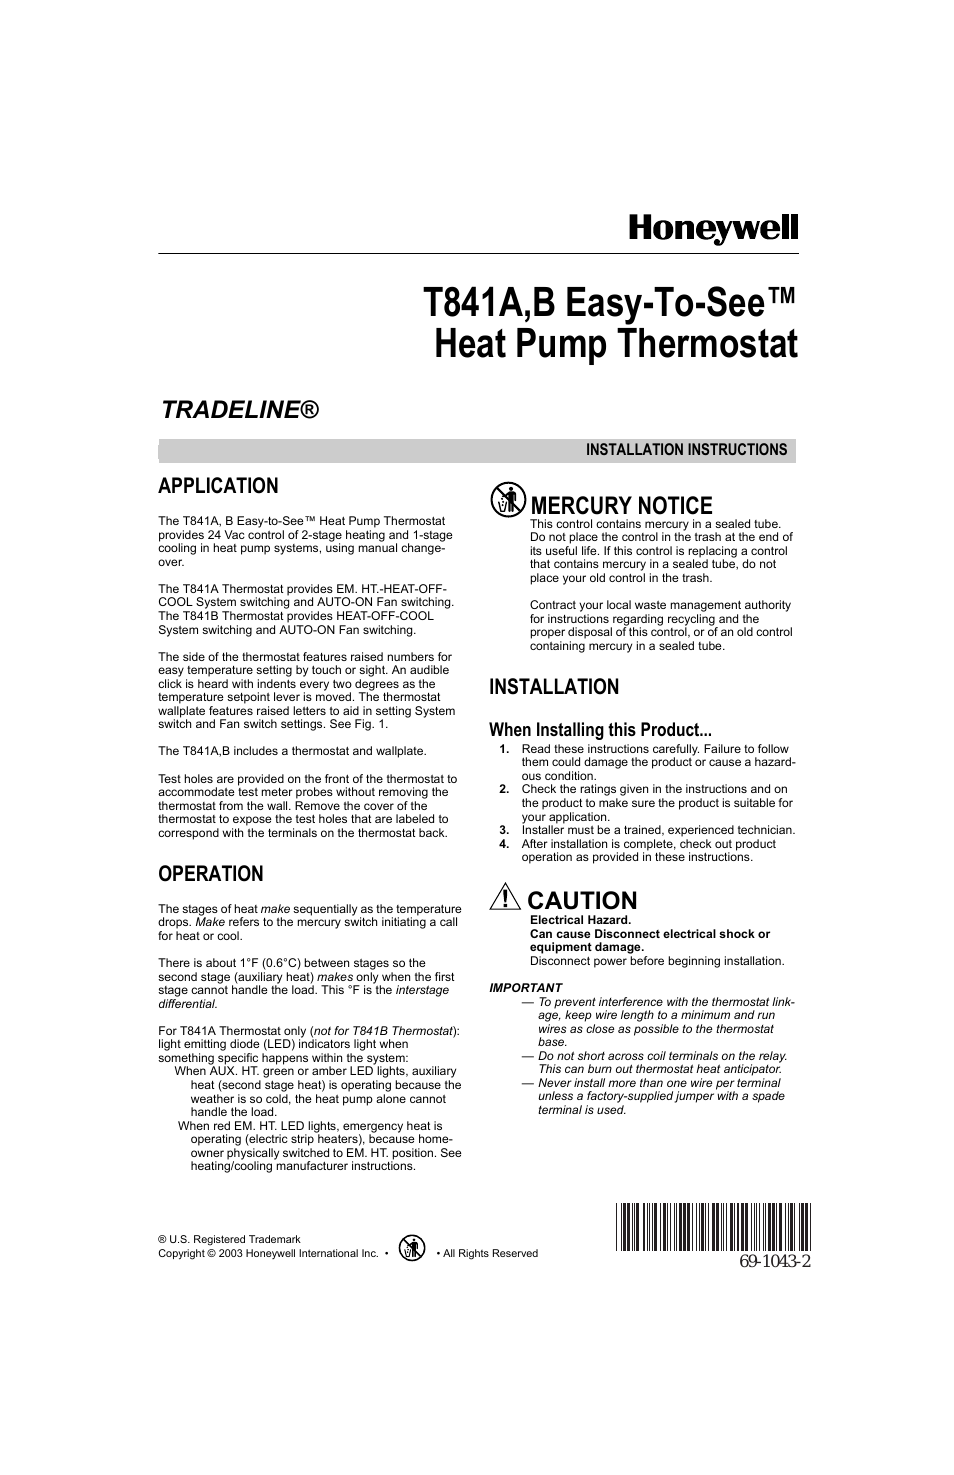 EASY-TO-SEE T841A